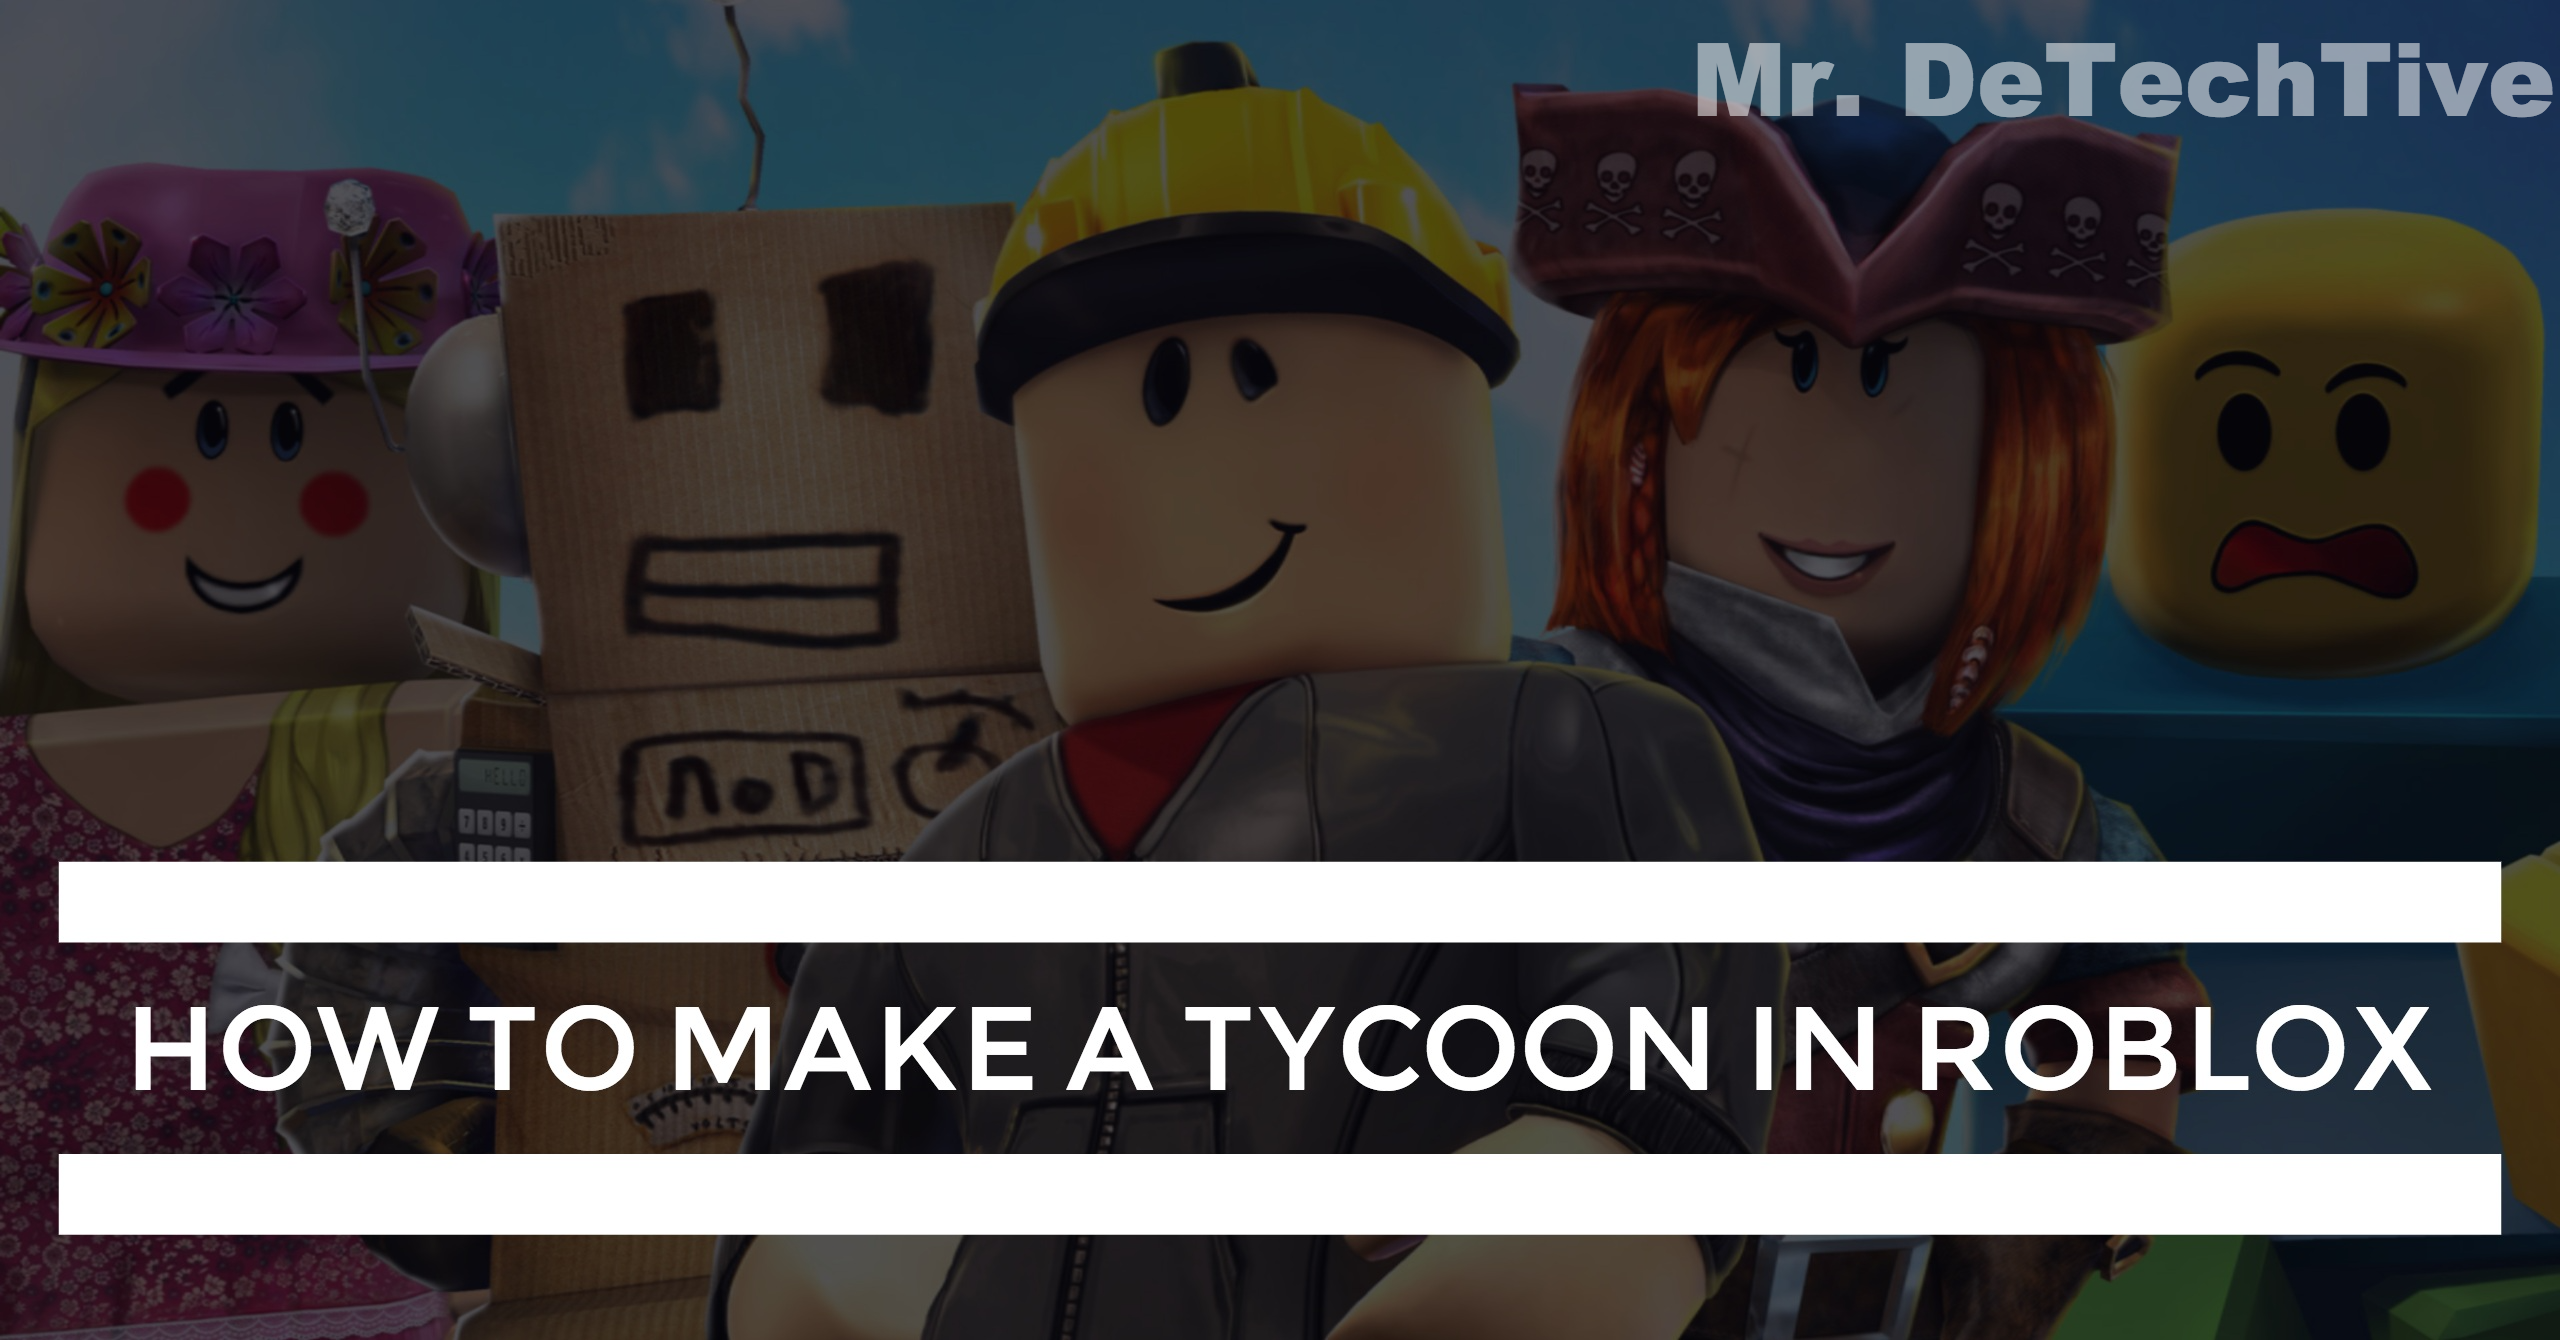 How To Make A Tycoon In Roblox Guide